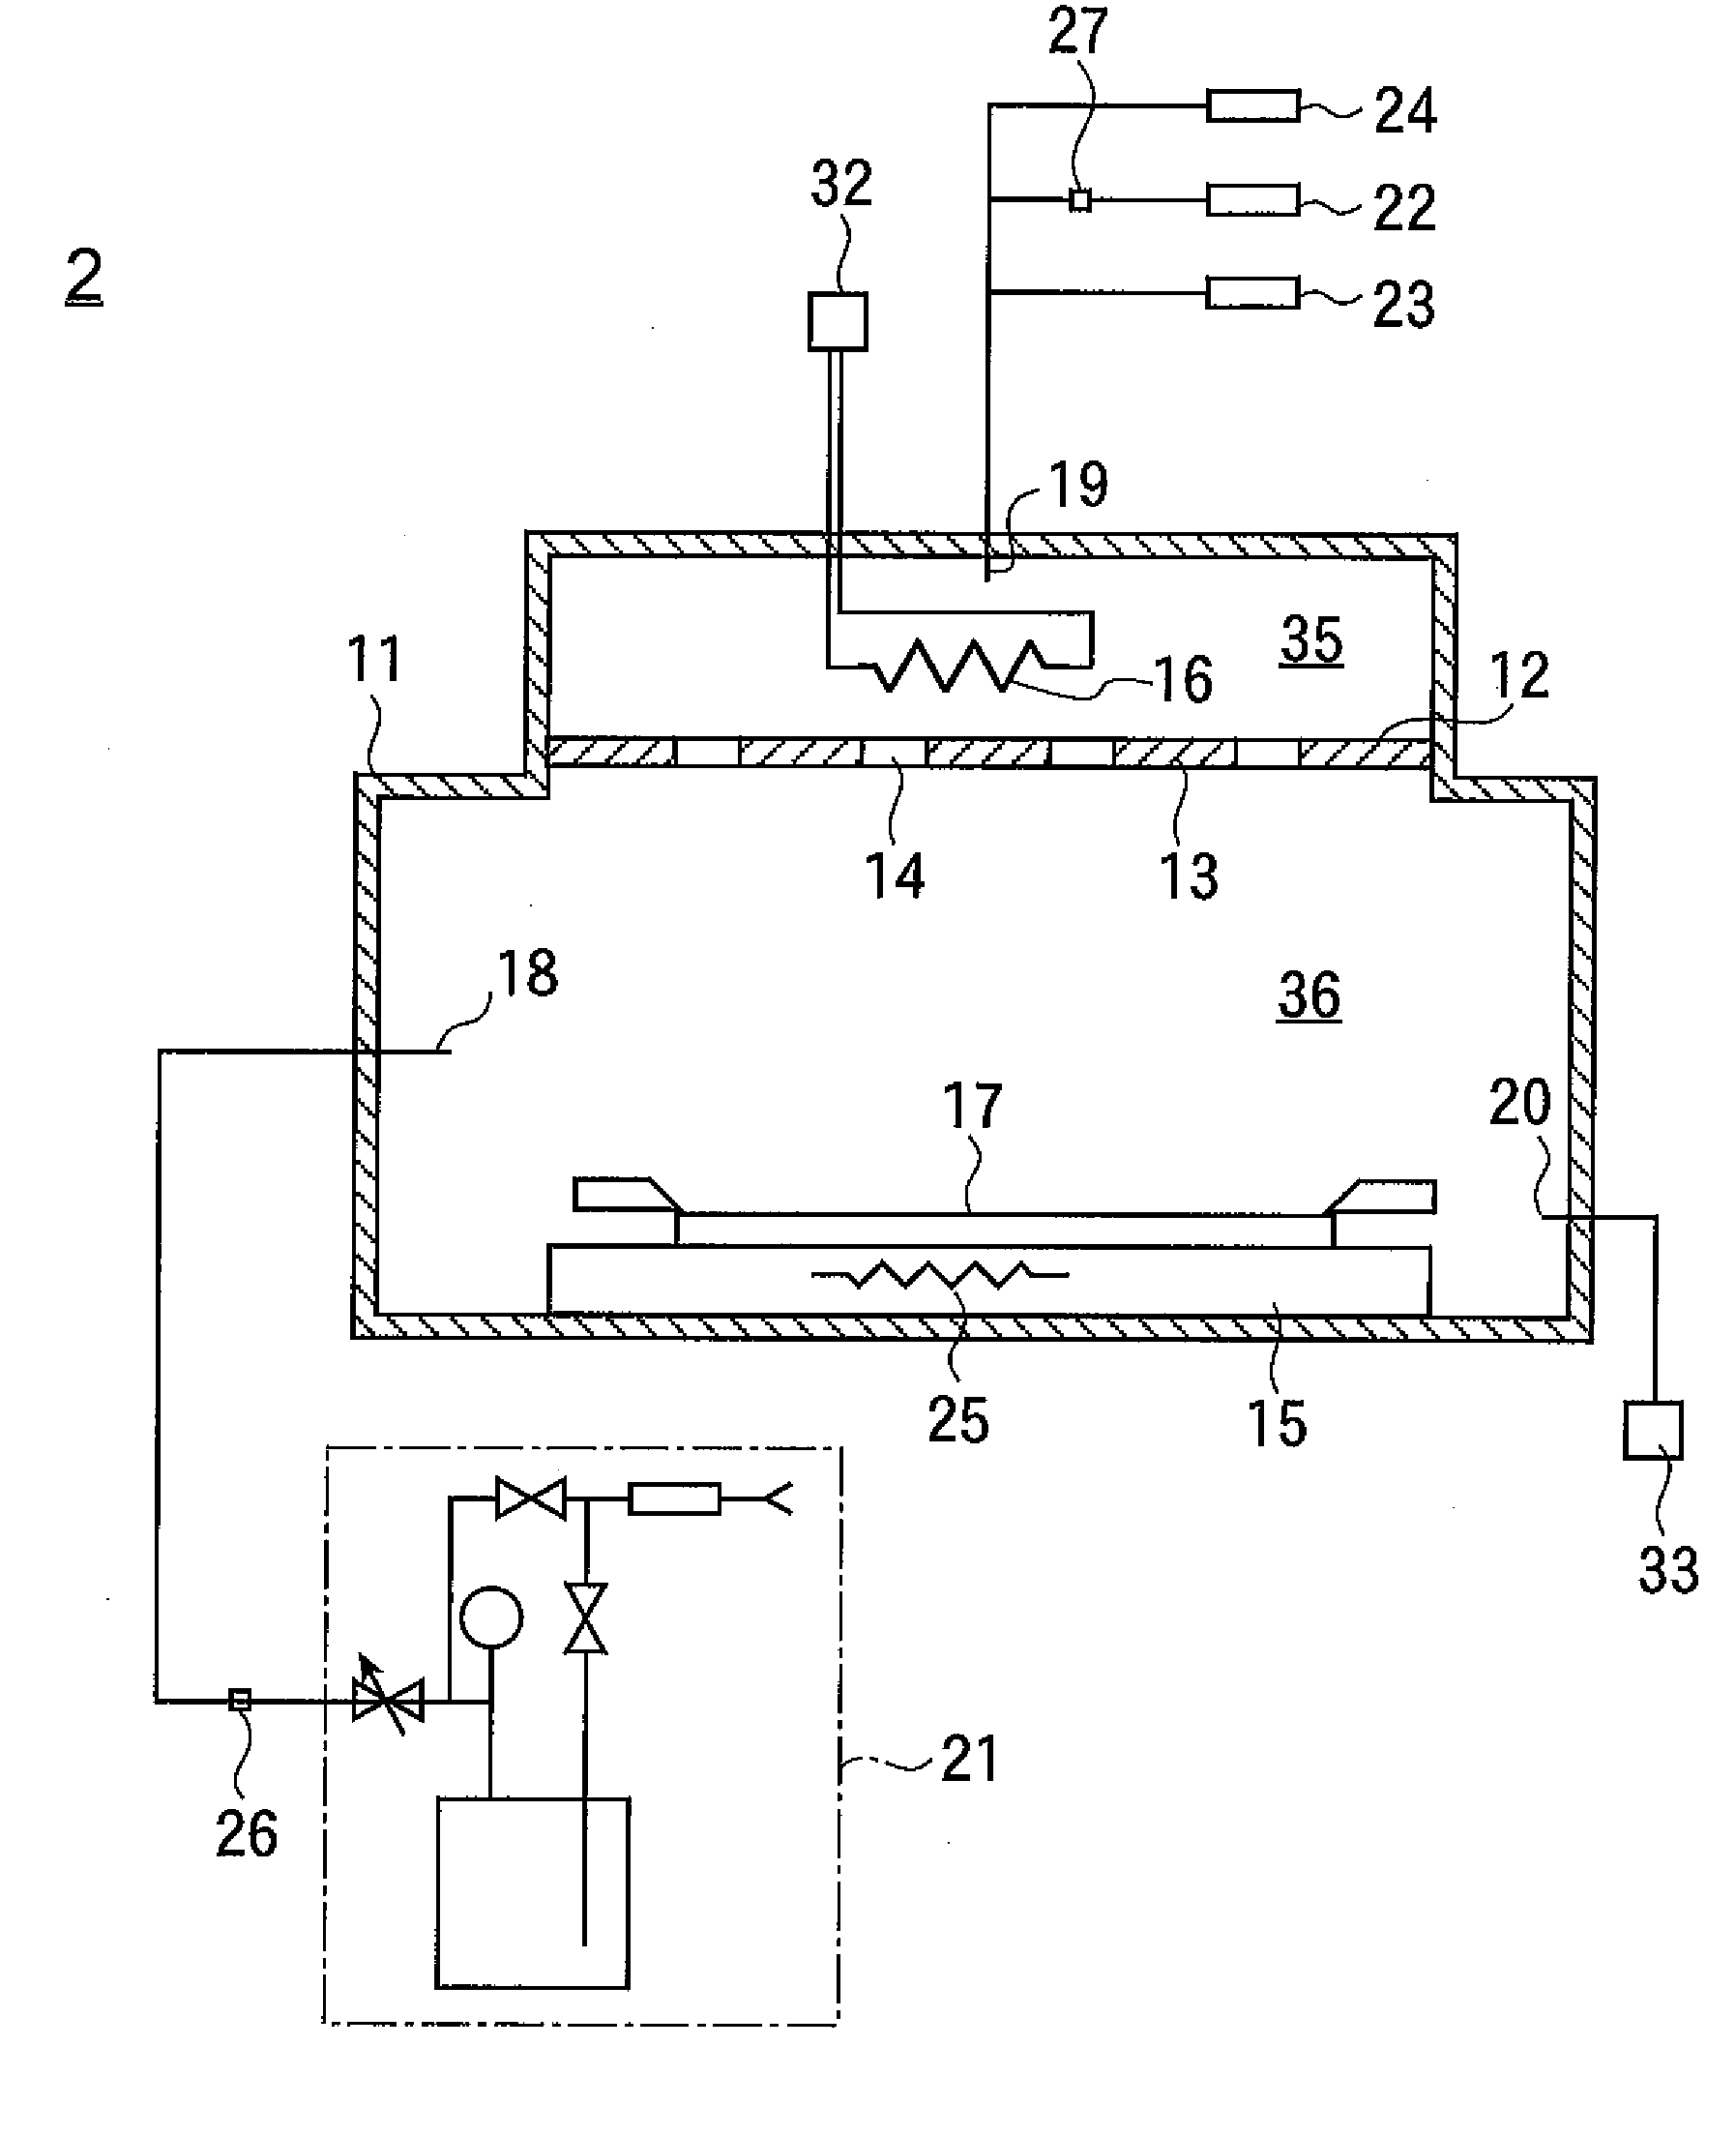 Film forming apparatus and a barrier film producing method